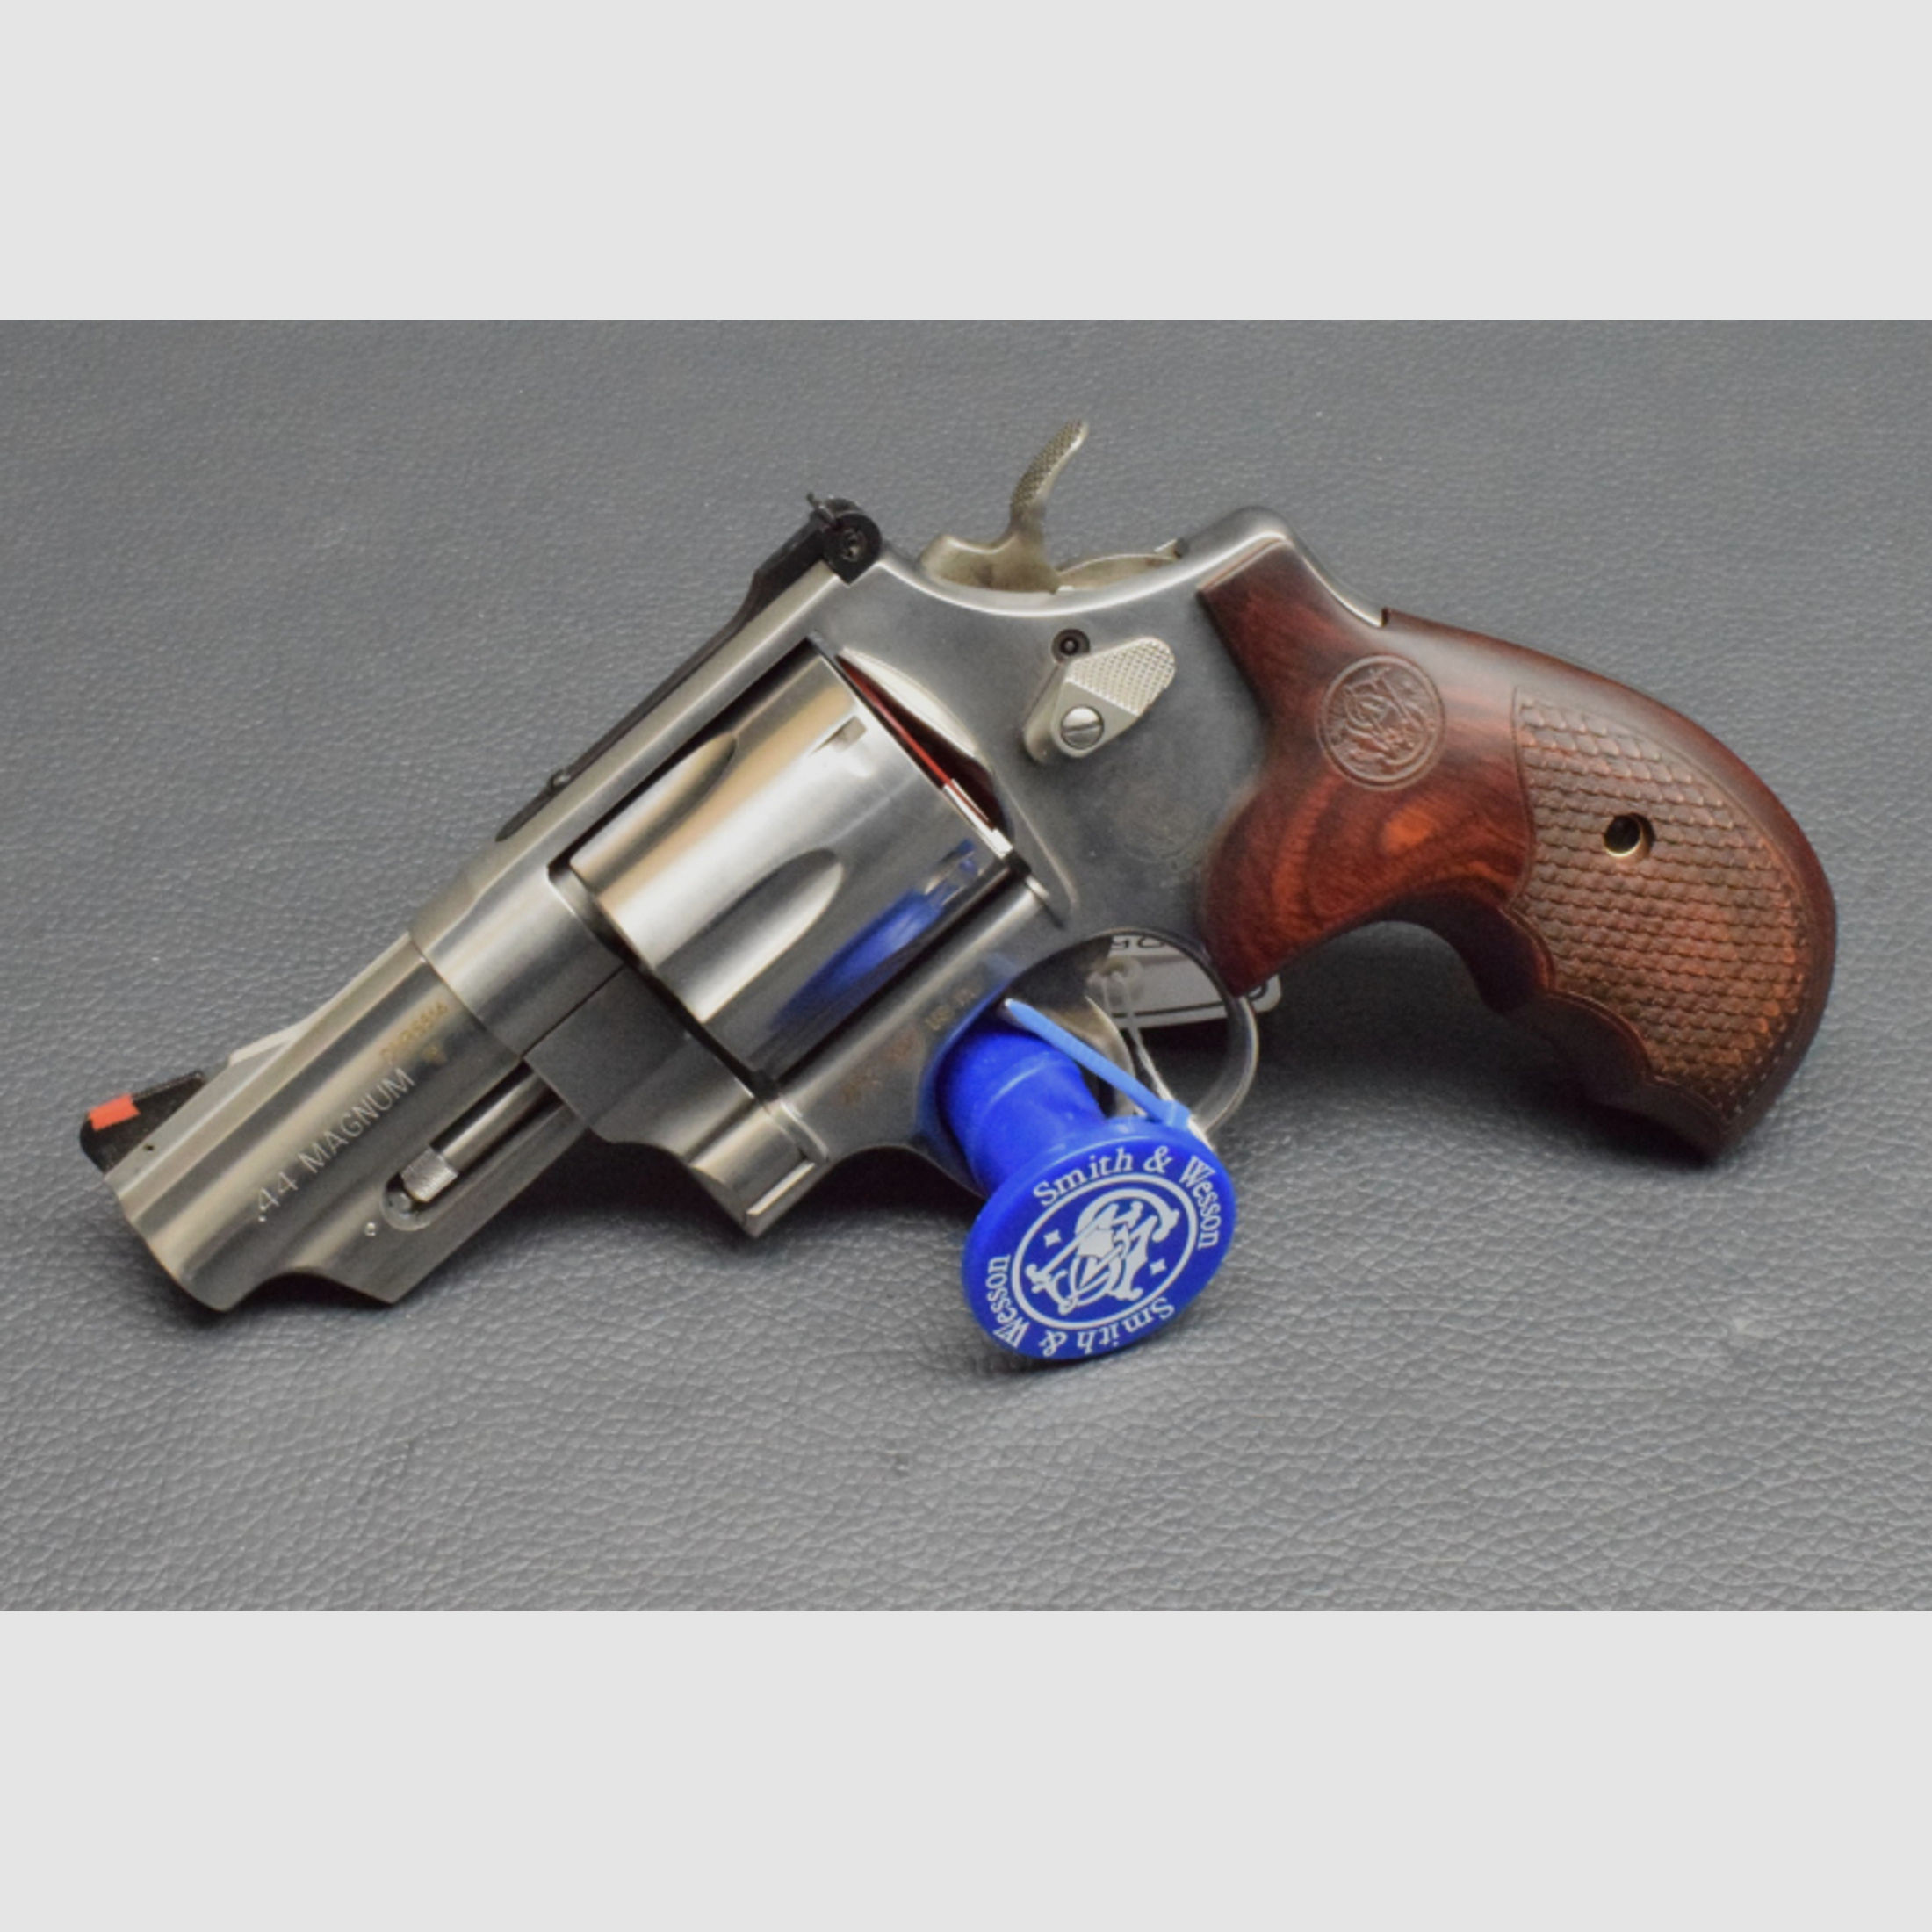 Smith & Wesson Mod. 629 DeLuxe, 3", Kaliber 44 Magnum, Neuware